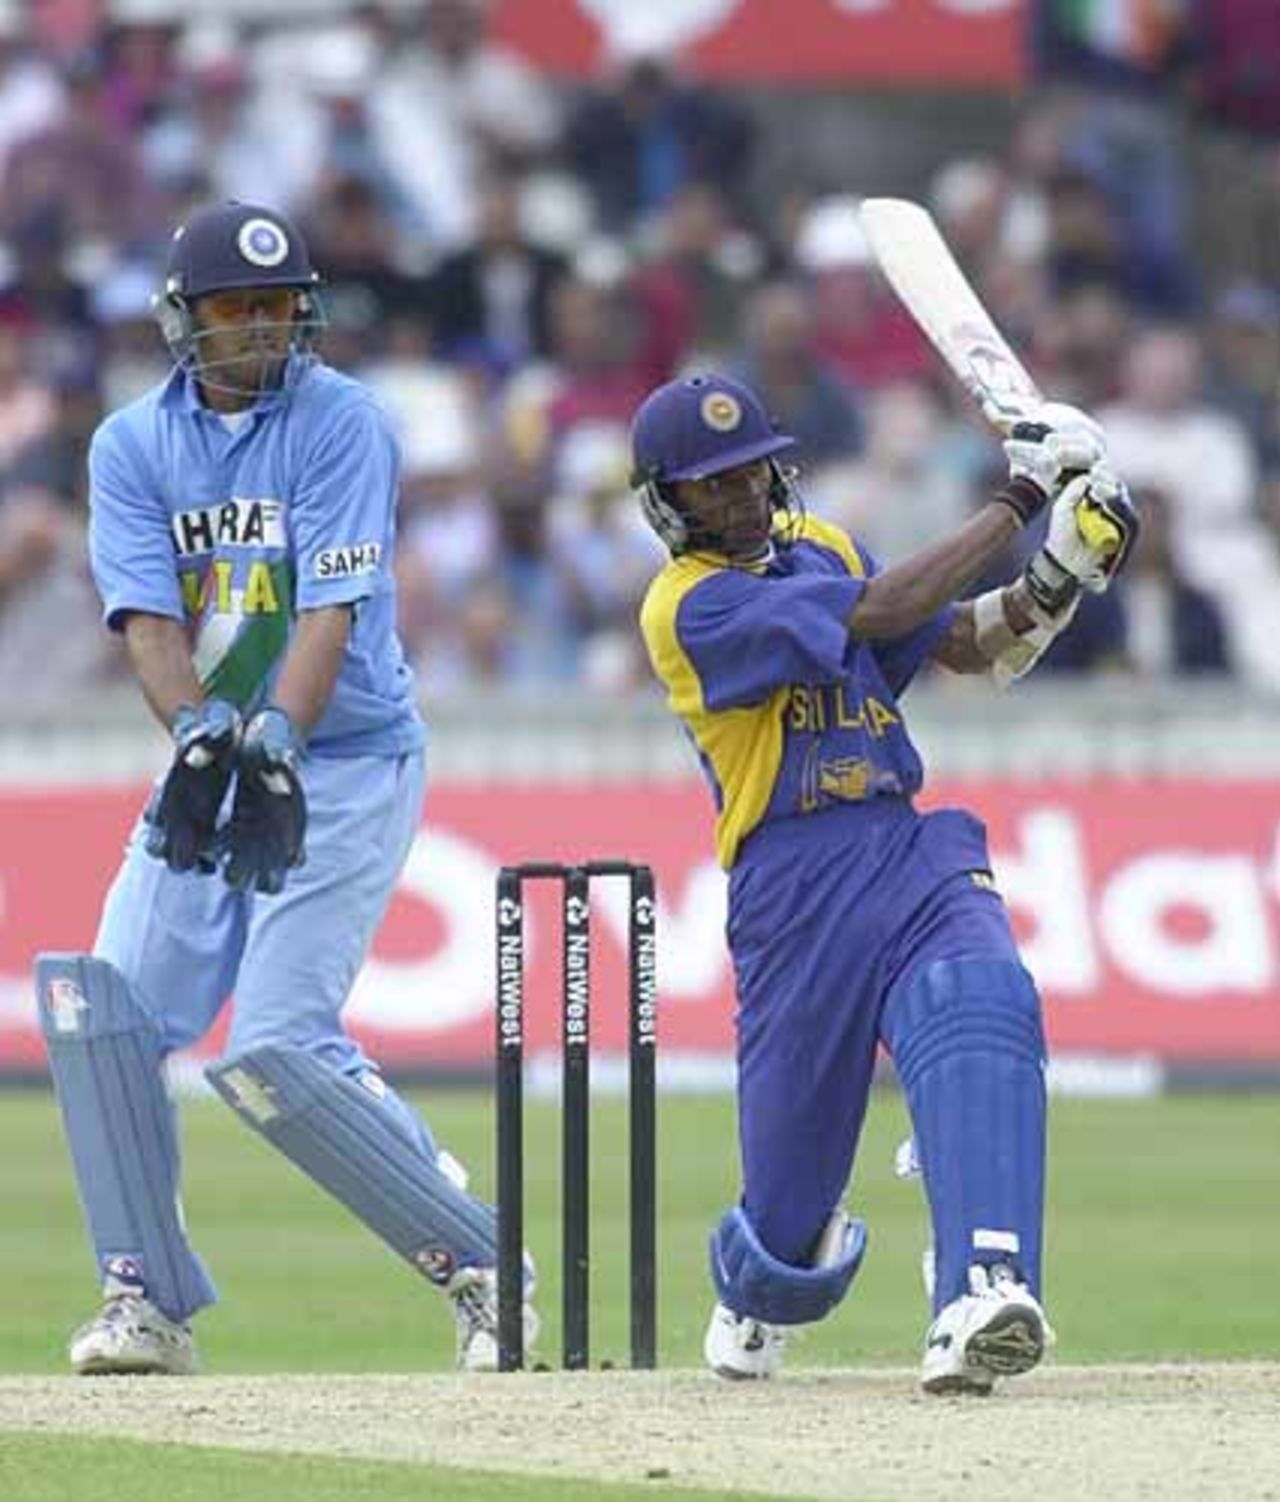 Chandana strokes the ball for two in his brave knock, India v Sri Lanka, NatWest Series, The Oval, 30 Jun 2002